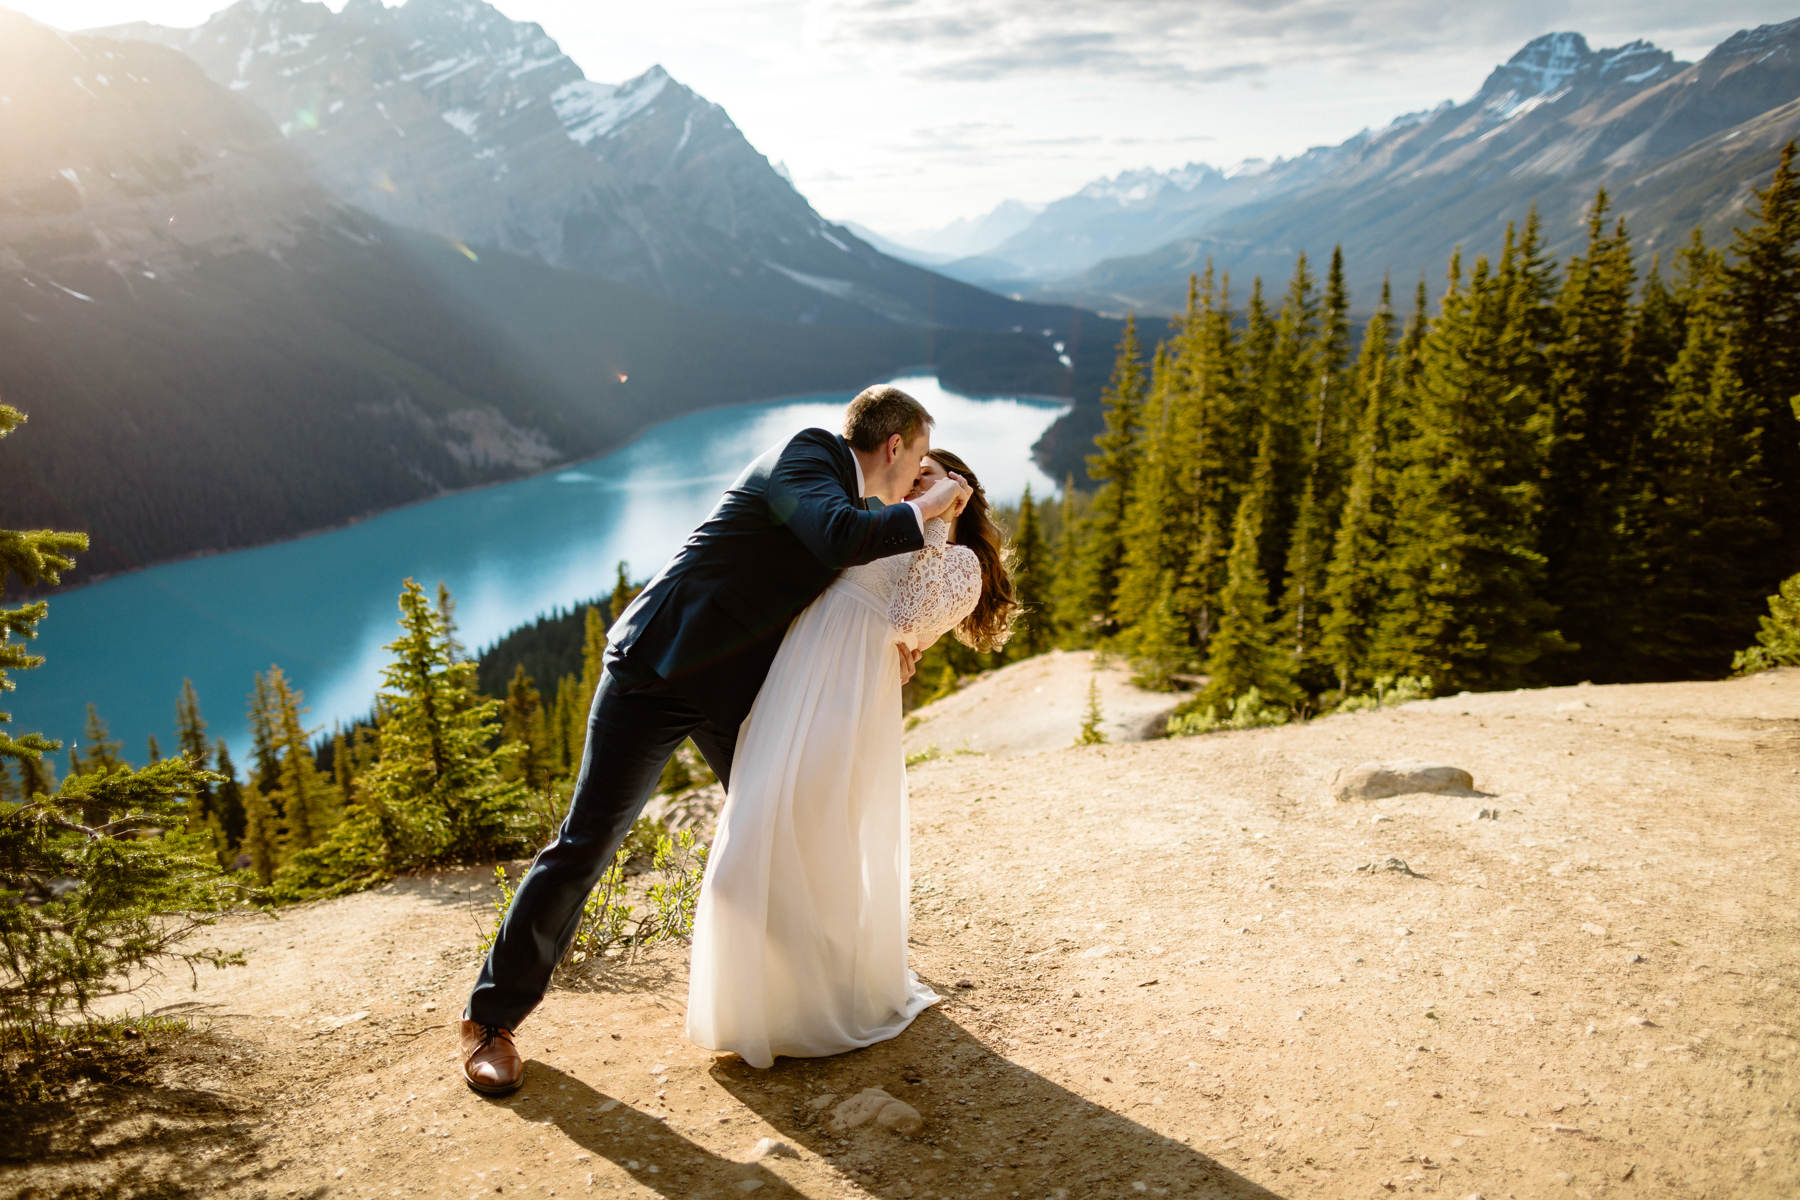 Vow Renewal Photography in Banff - Image 21